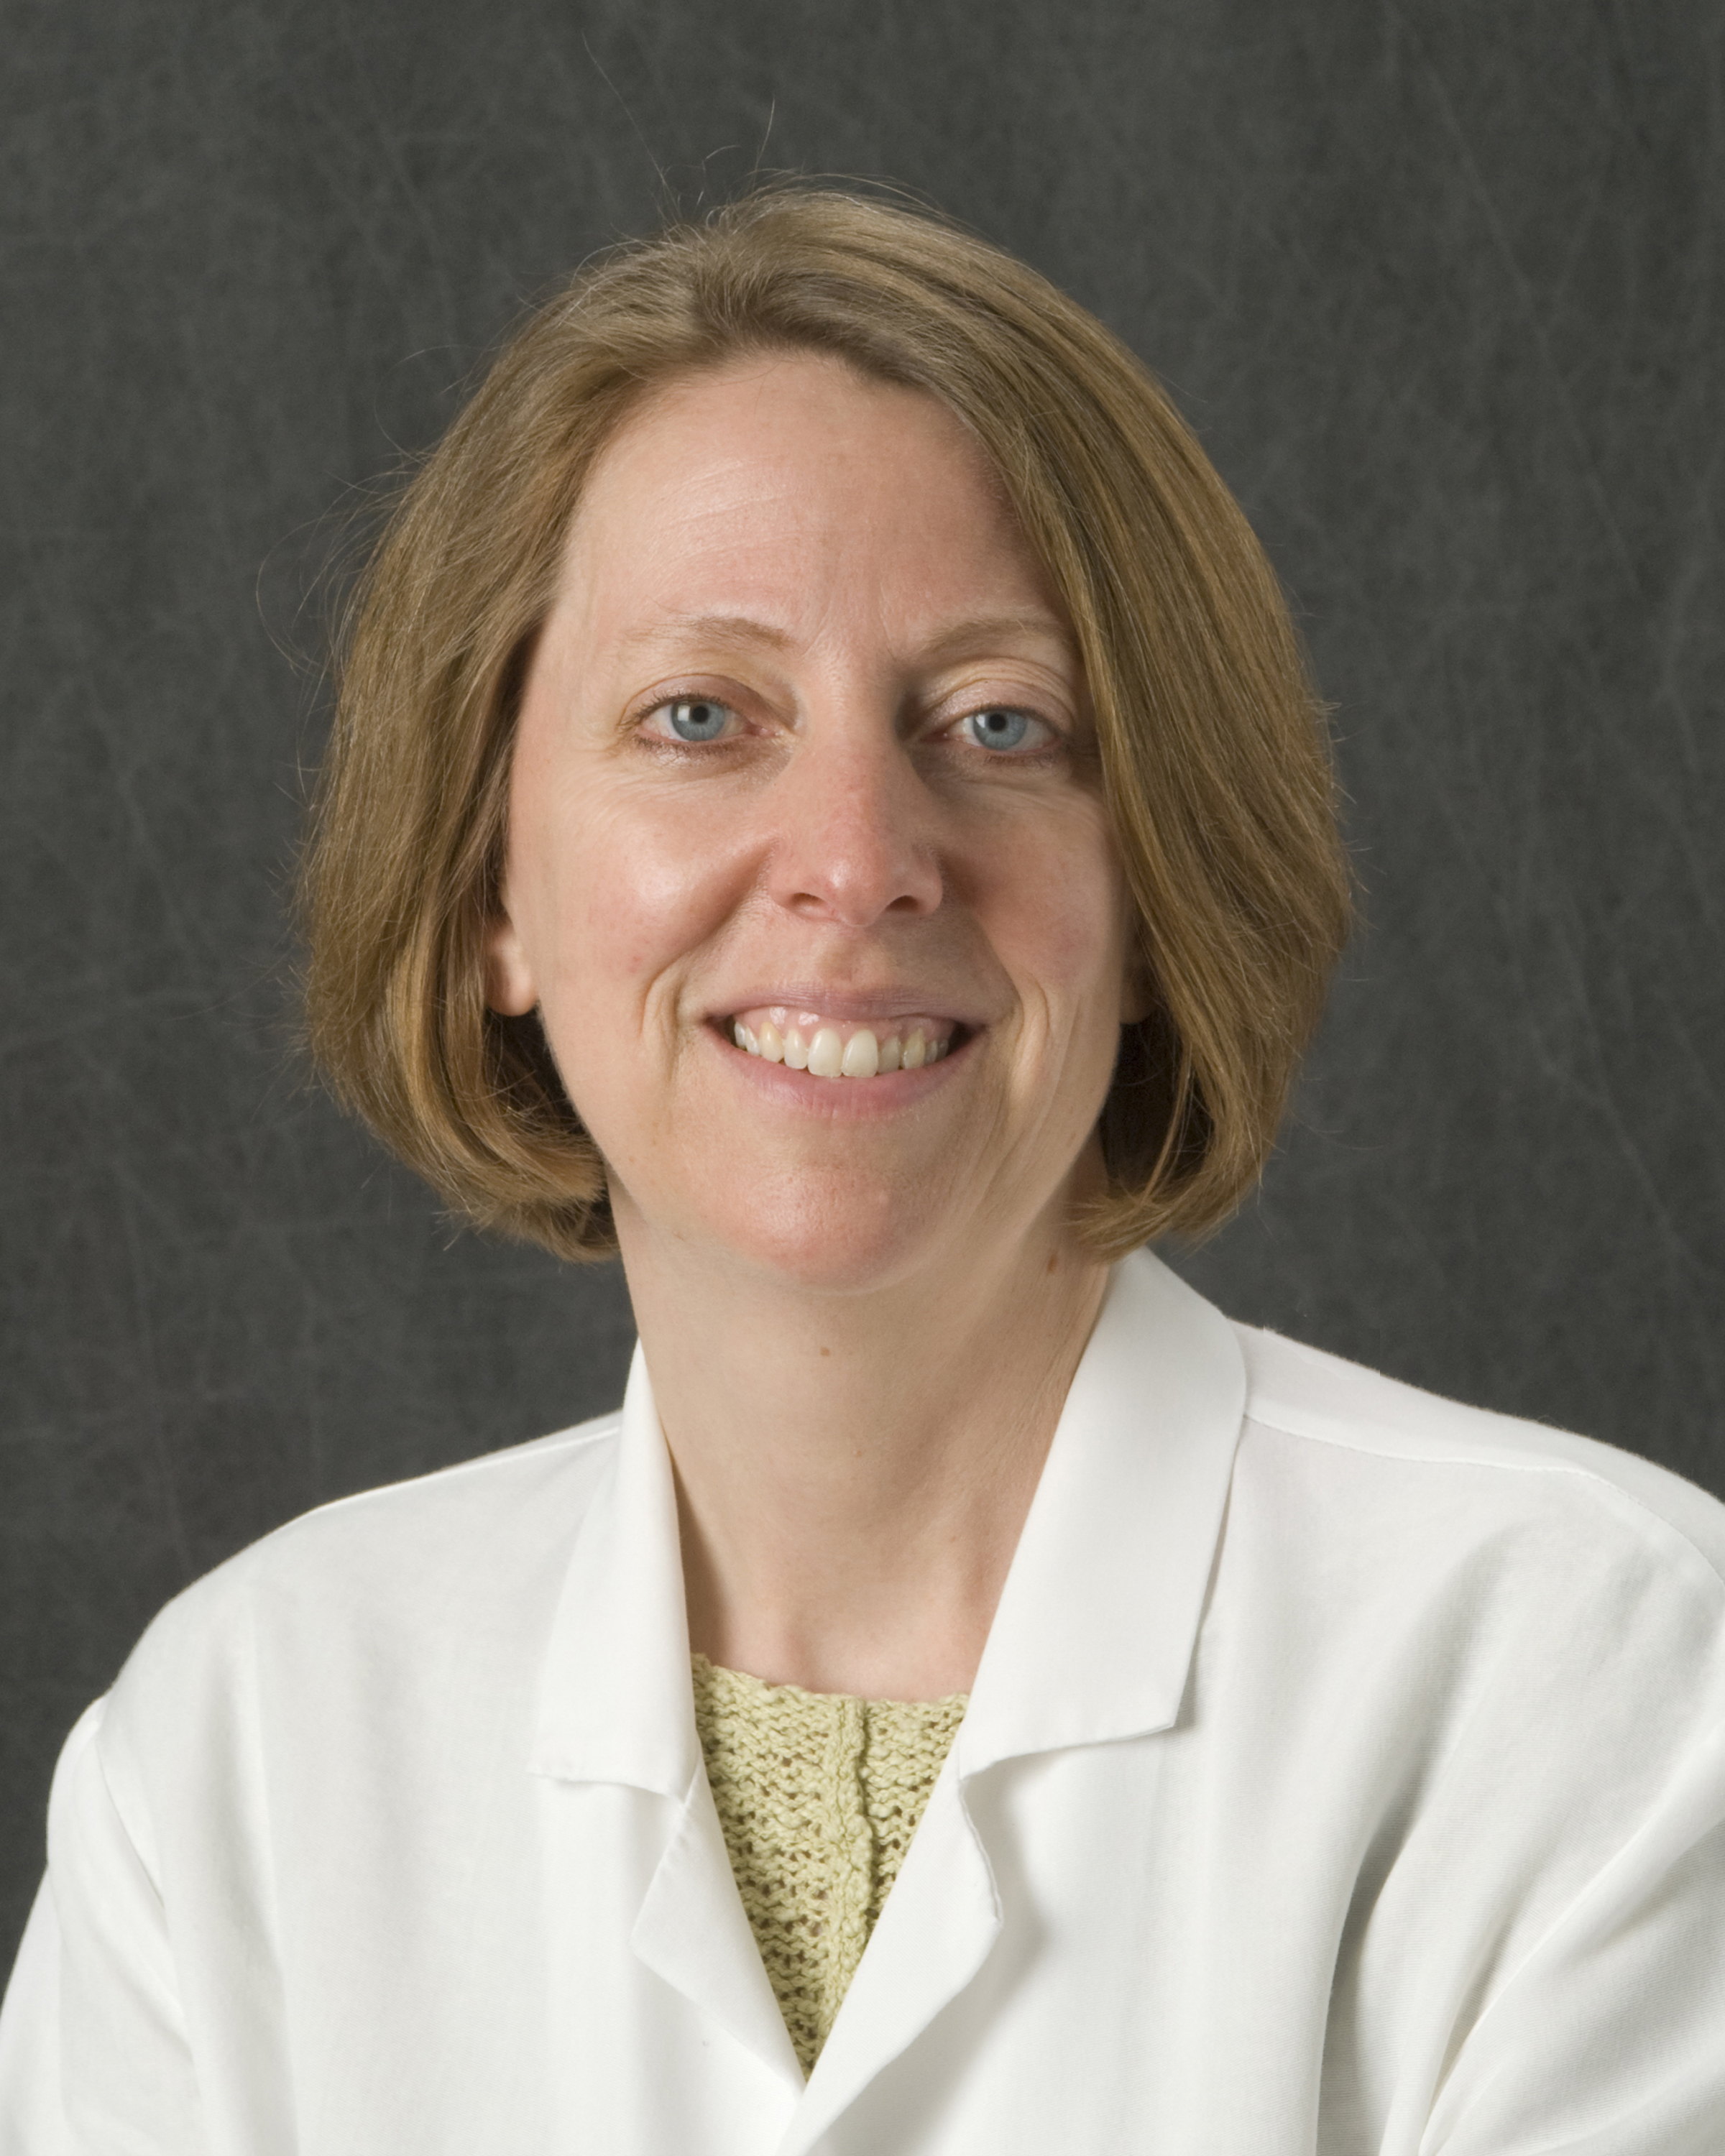 Lucy Wibbenmeyer, MD